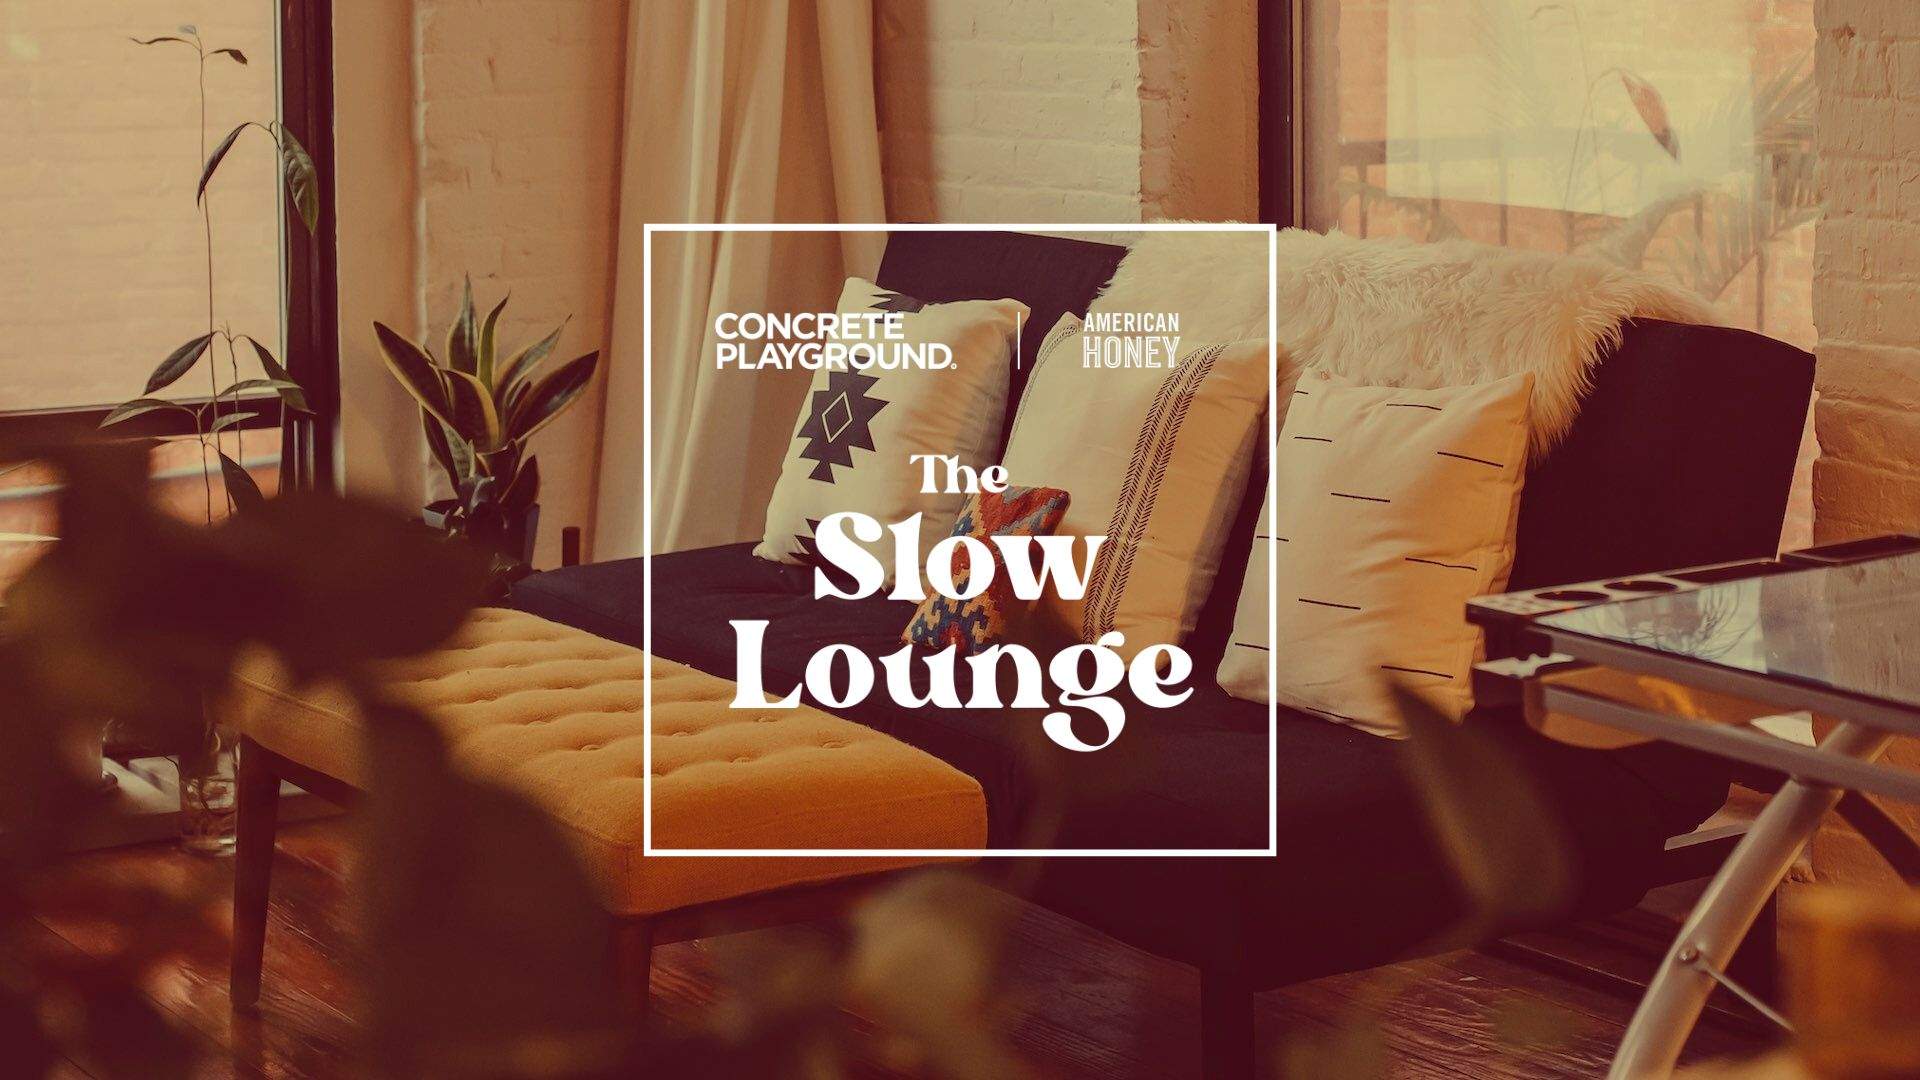 Win Exclusive Access to The Slow Lounge, an Event by Concrete Playground and American Honey